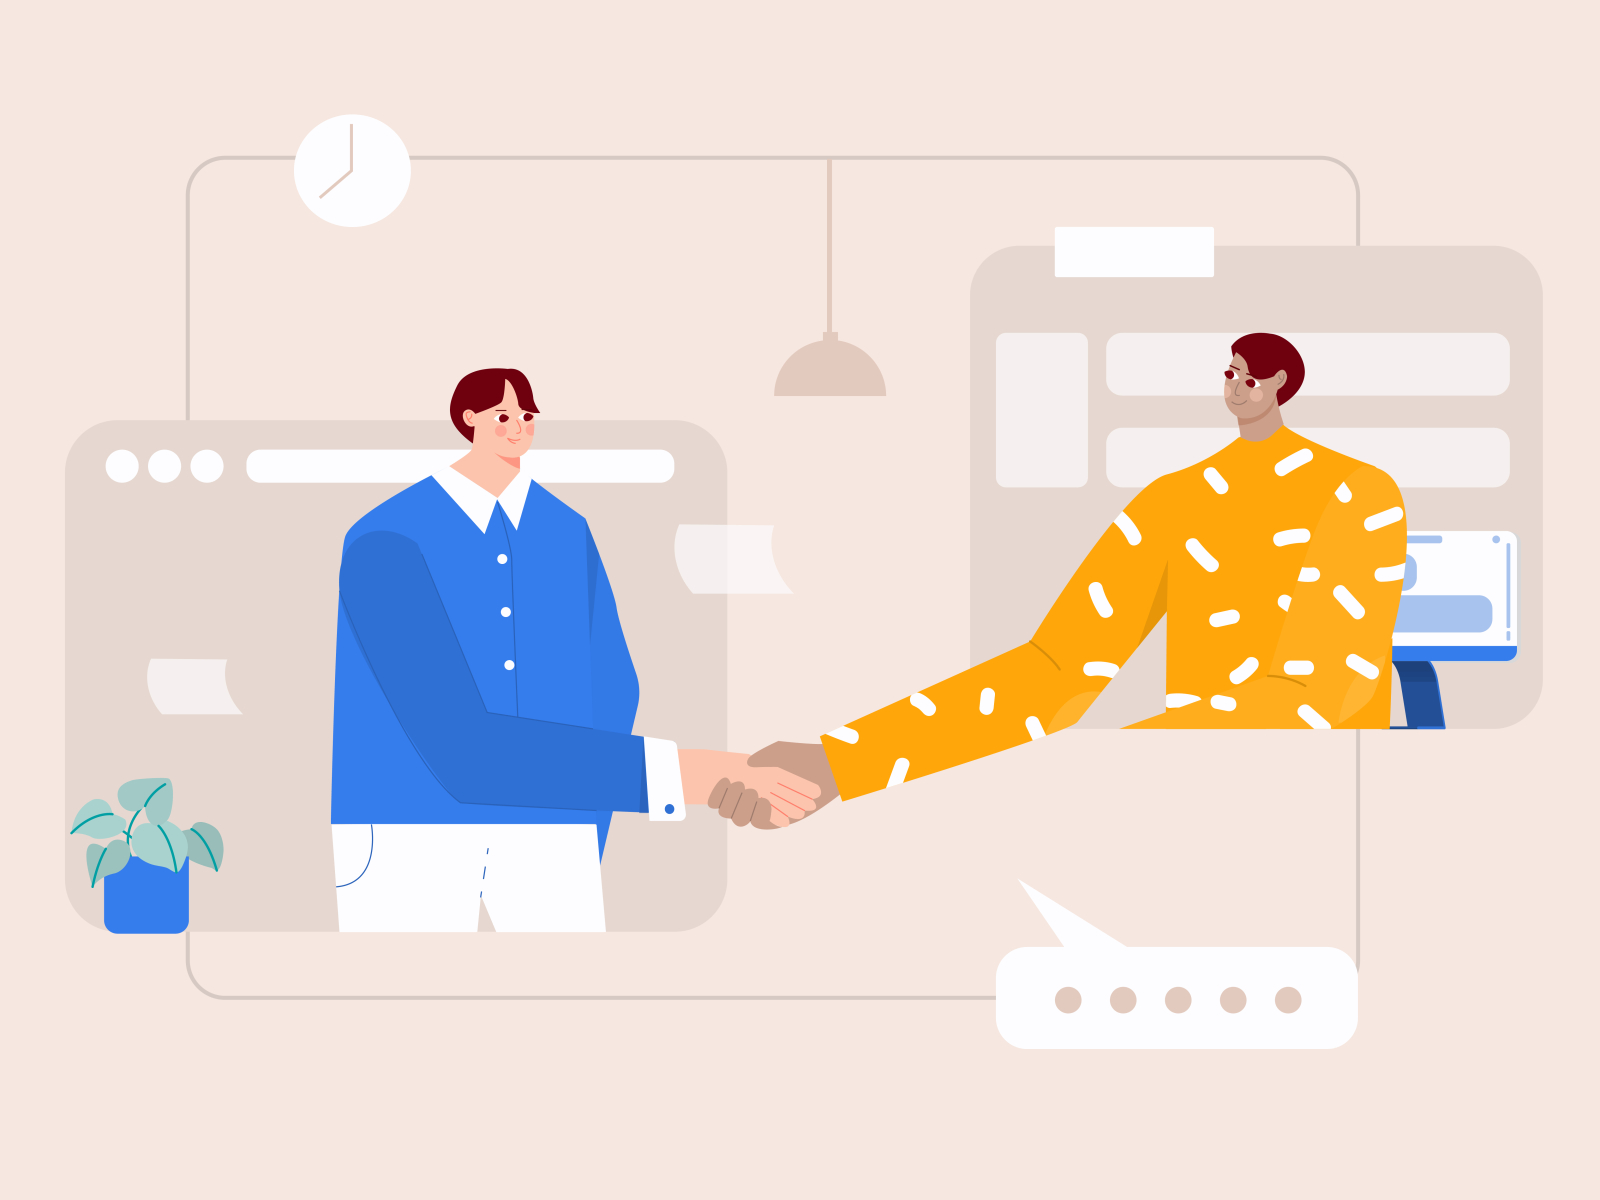 Dealing project with virtual handshake illustration b2b illustration business character chat illustration conversation deal group illustration handshake illustration meeting project project goal startup team virtual wfh work work from home work together working illustration